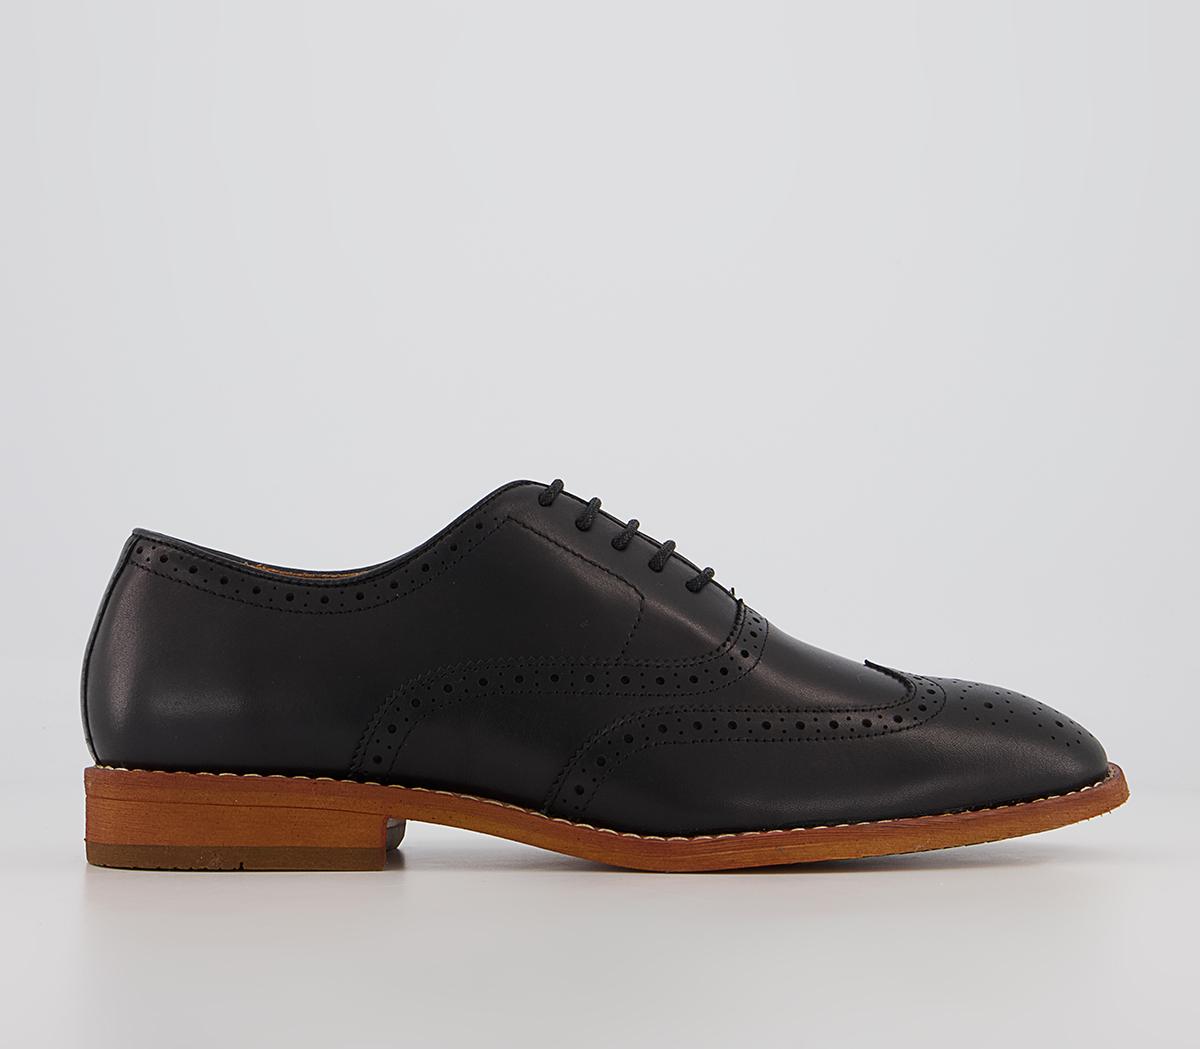 OfficeMeanest Oxford BroguesBlack Leather